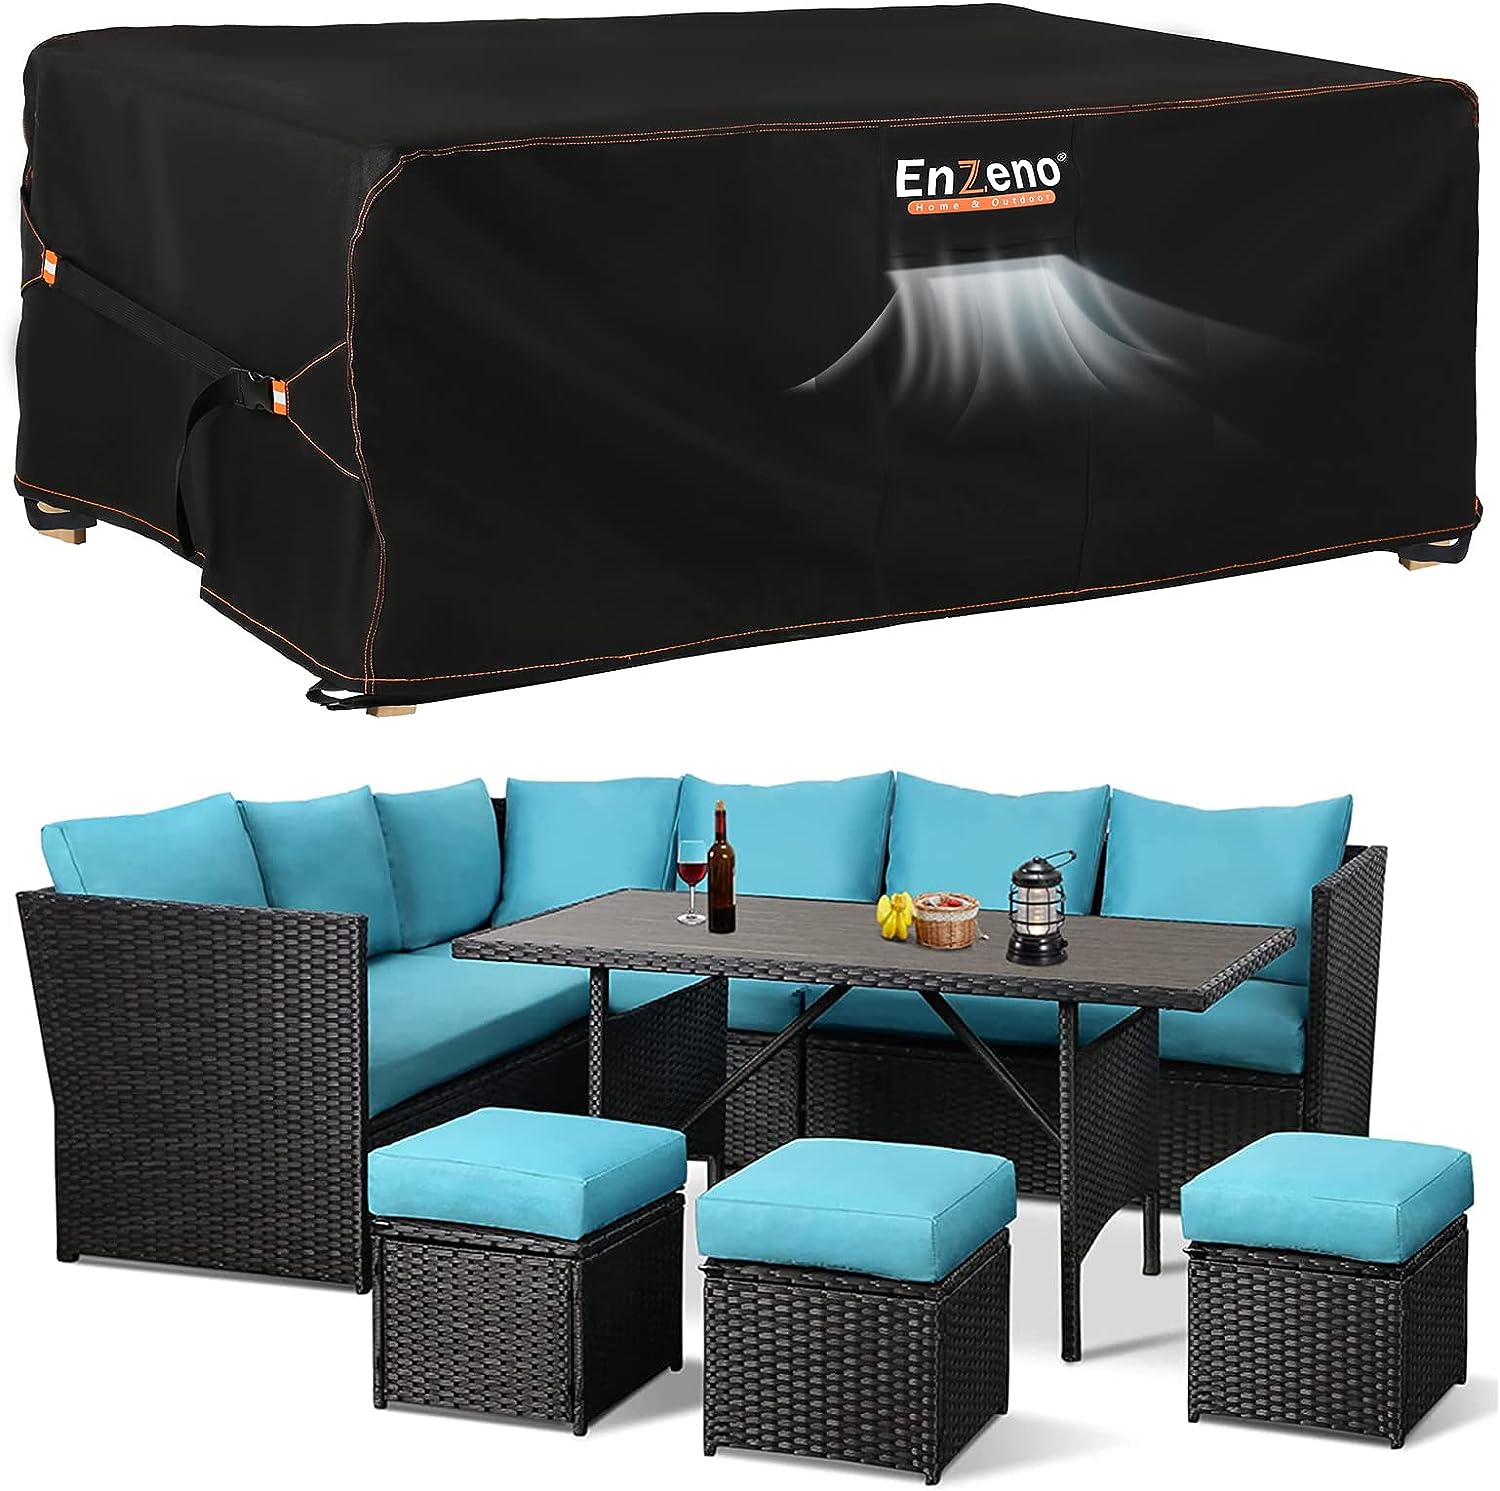 Enzeno Outdoor Garden Furniture Set Covers Waterproof，250X250X90cm Large Garden Furniture Cover ，420D Heavy Duty Patio Furniture Covers for Outside，Windproof,Anti-UV for Chair and Table Rattan Sofa